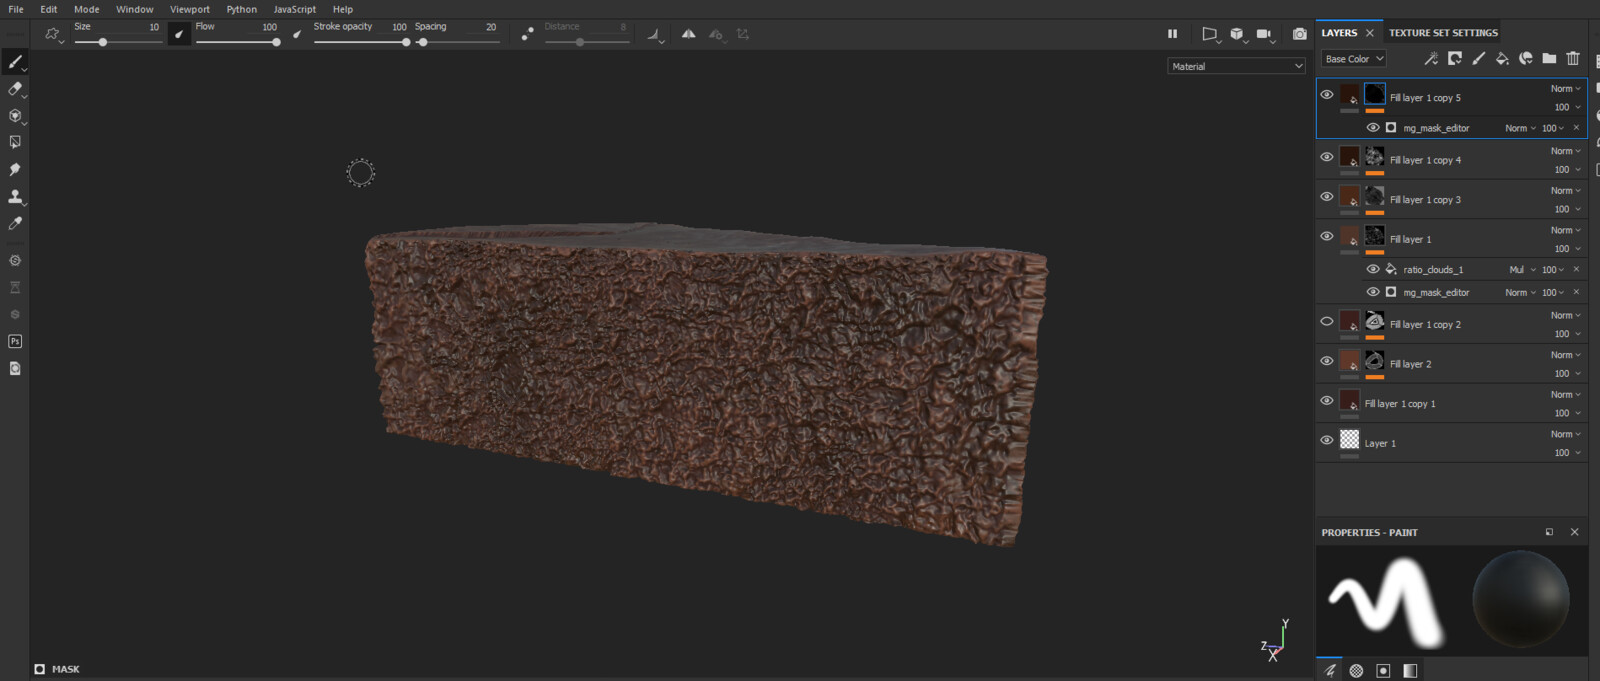 Texturing in substance painter - one subtool at a time.